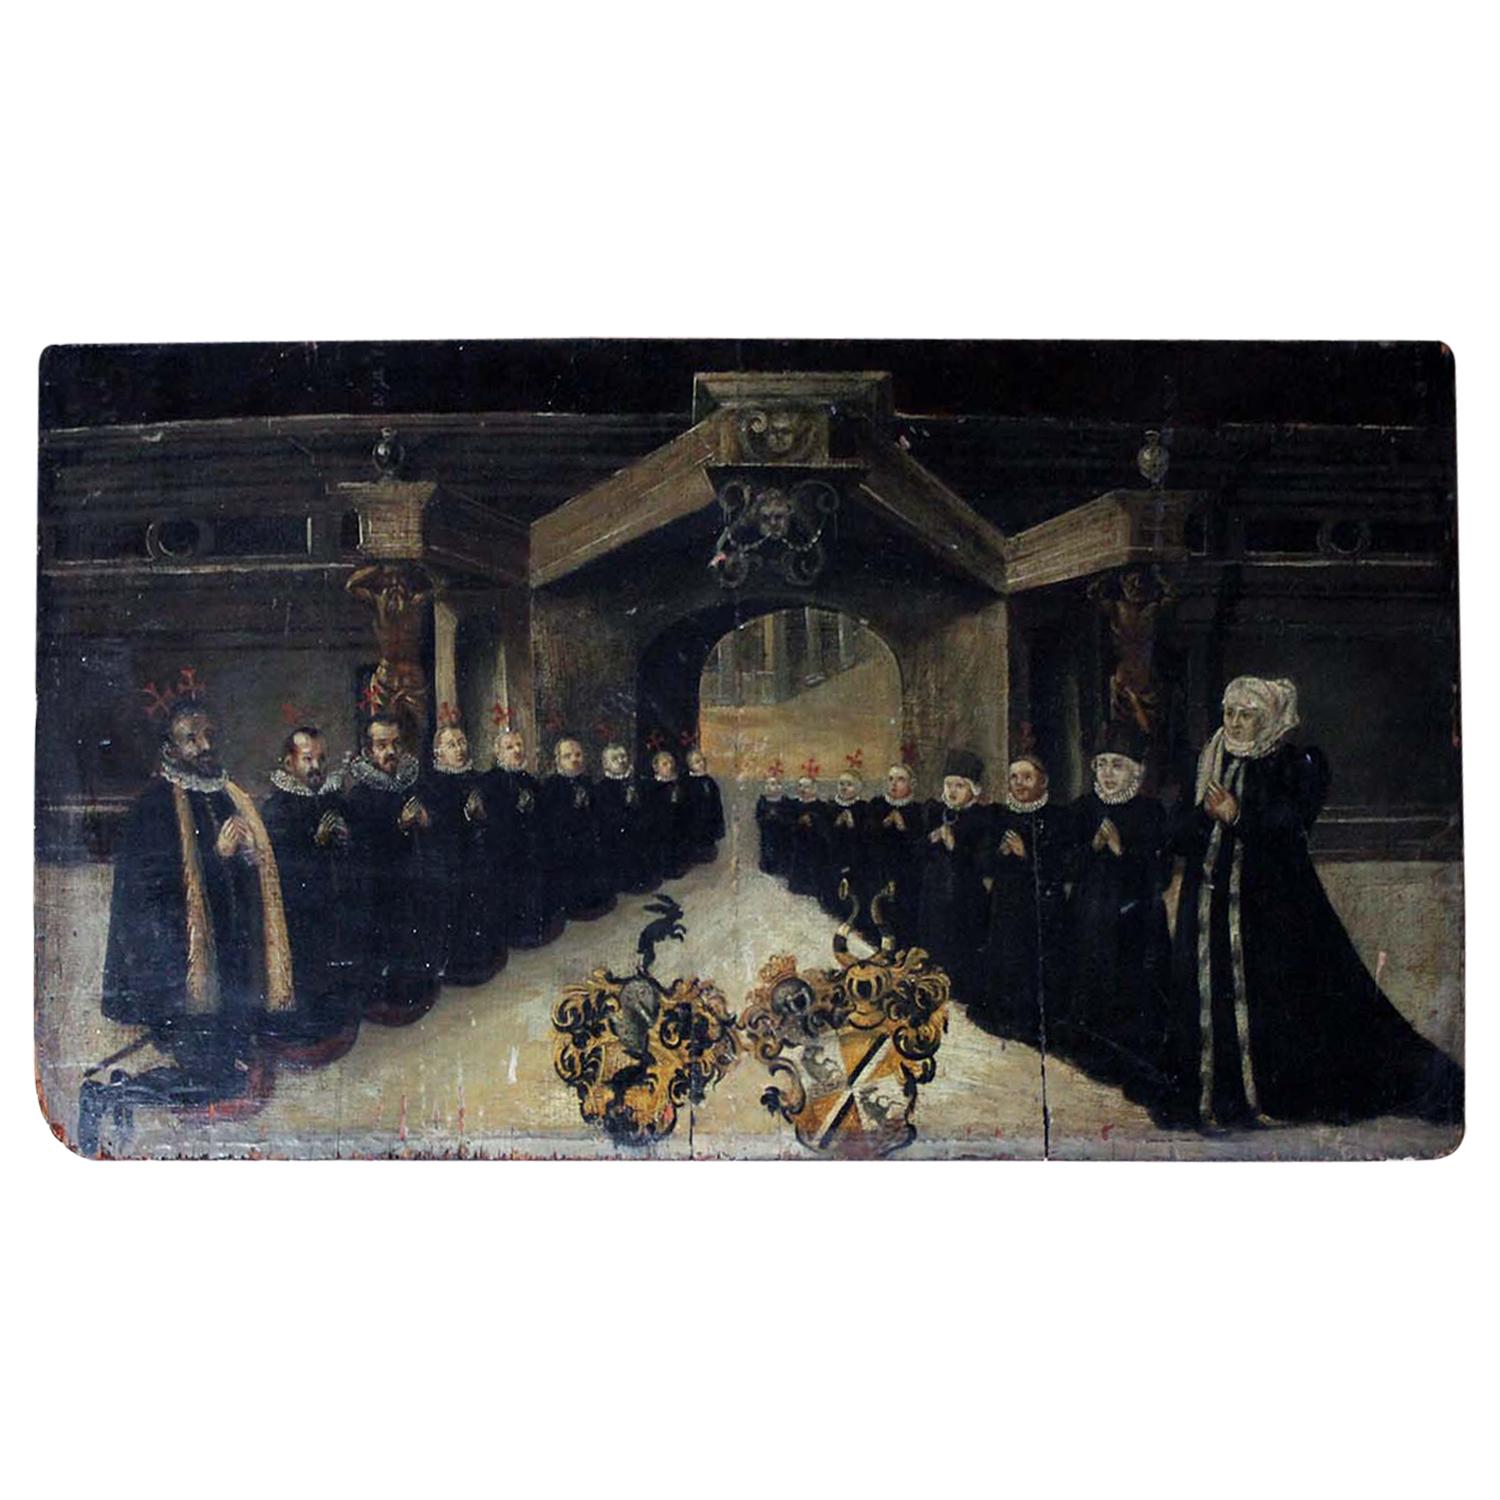 Rare Mid-17th Century Oil on Panel, in Memory of a Patrician Family